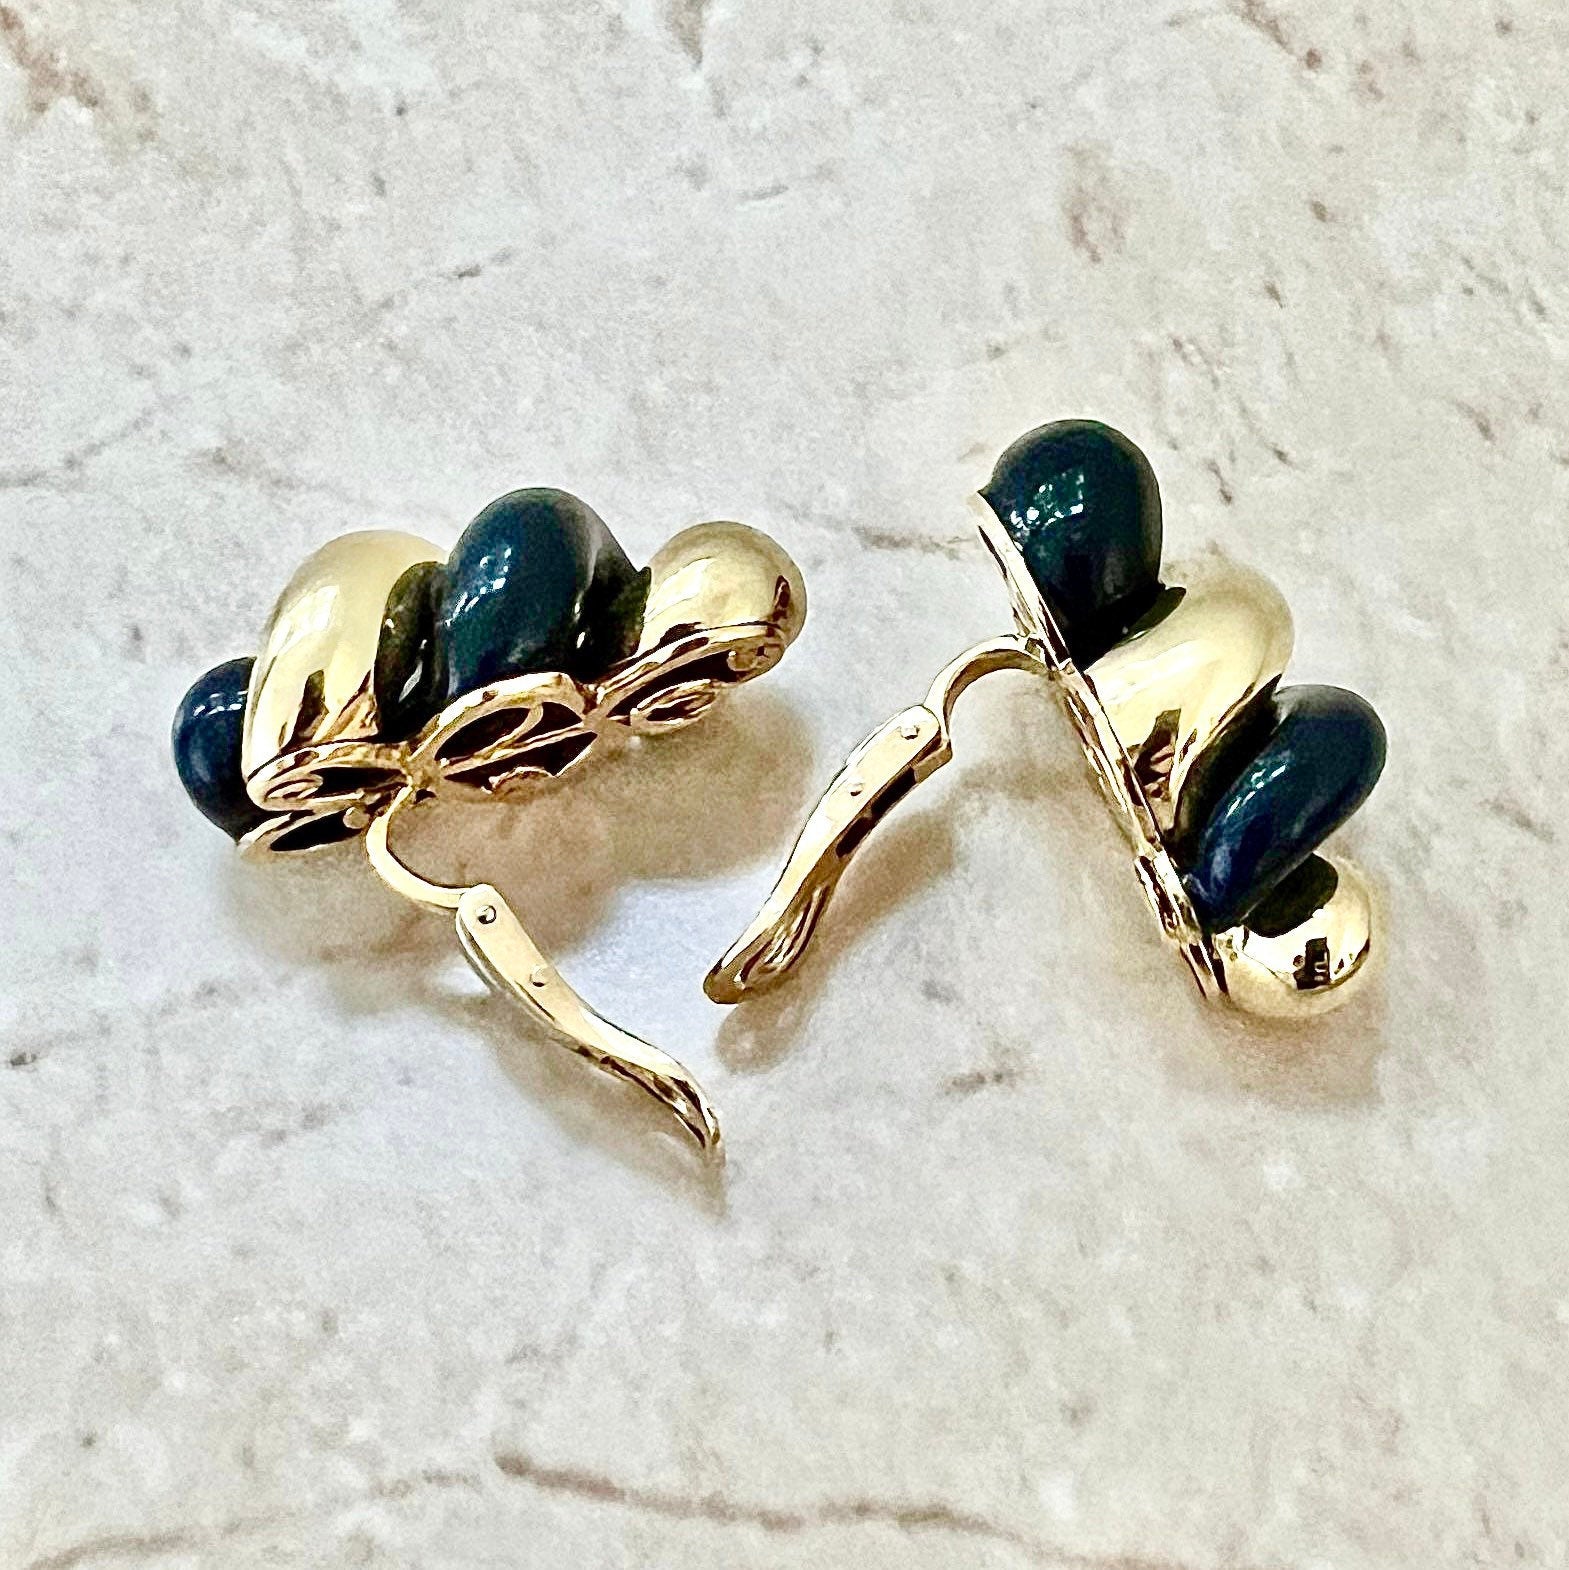 Fine Vintage 18 Karat Gold & Onyx Earrings By Carvin French - Gold Spiral Earrings - Statement Earrings - Cocktail Earrings - Gifts For Mom